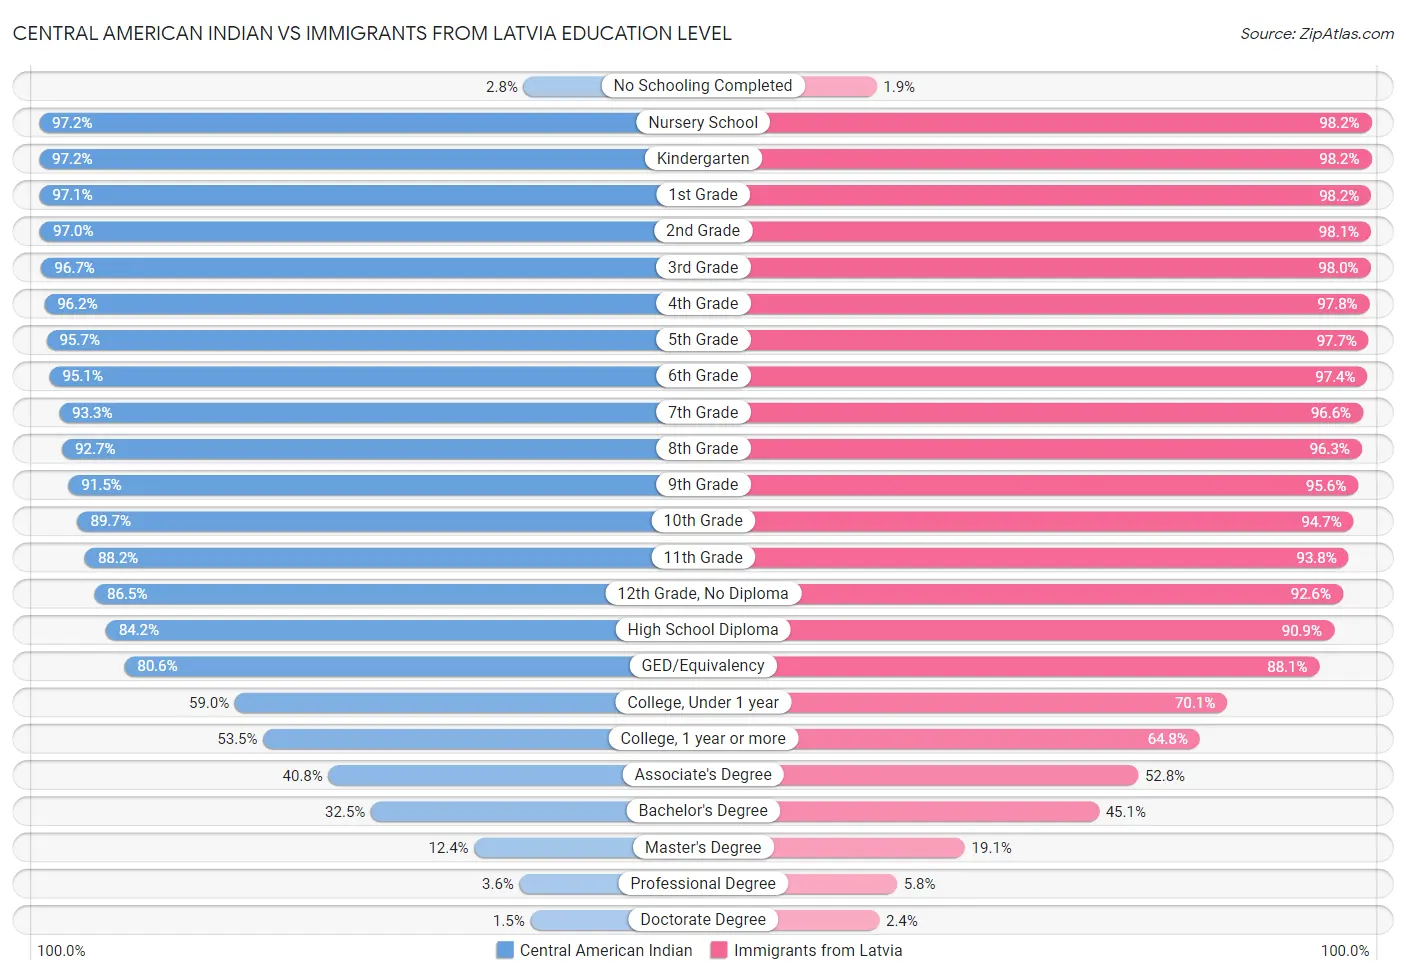 Central American Indian vs Immigrants from Latvia Education Level